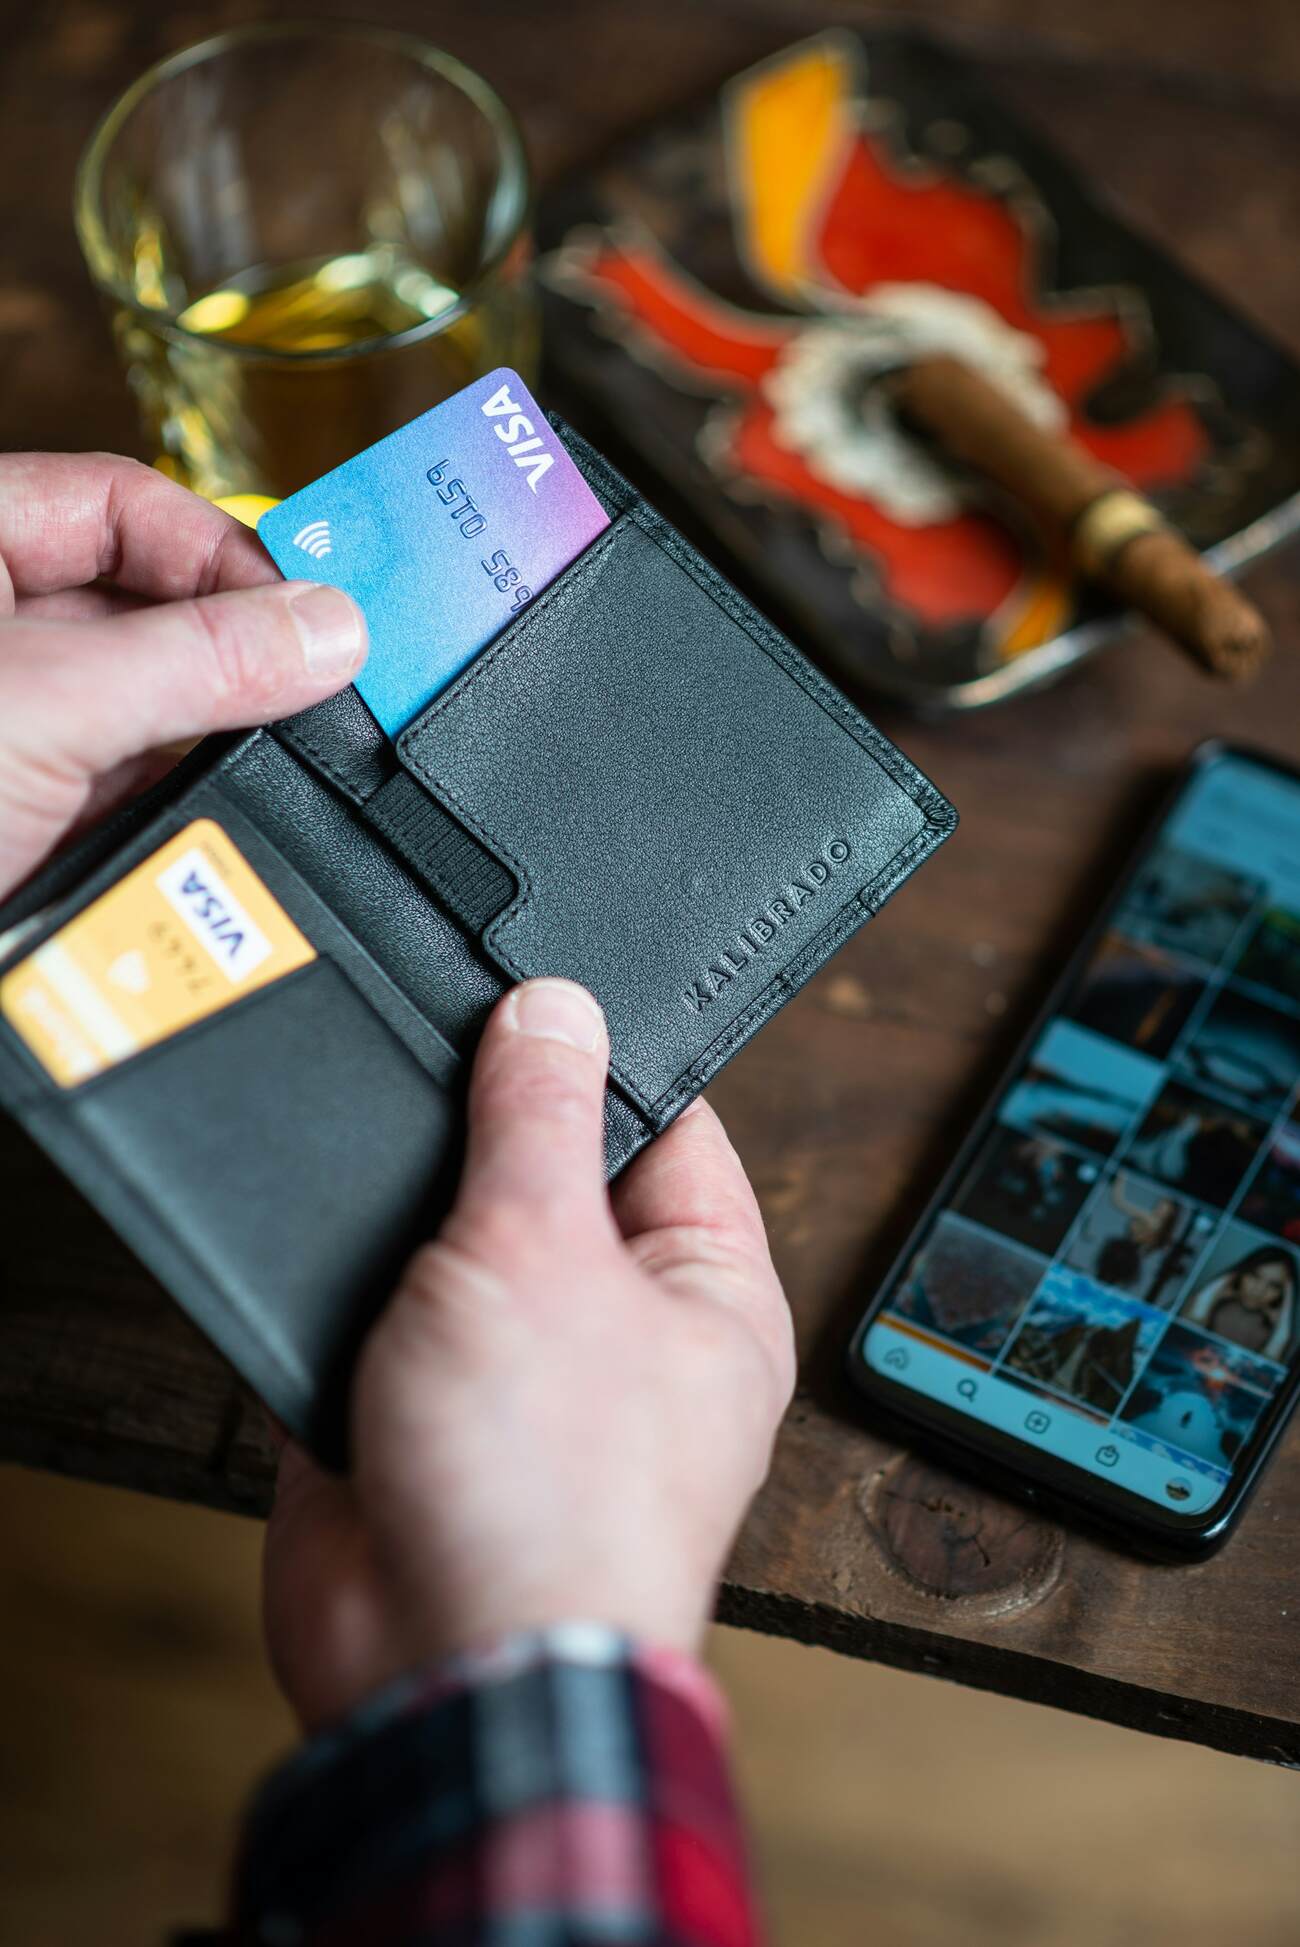 A sleek black leather wallet with multiple card slots and a cash compartment